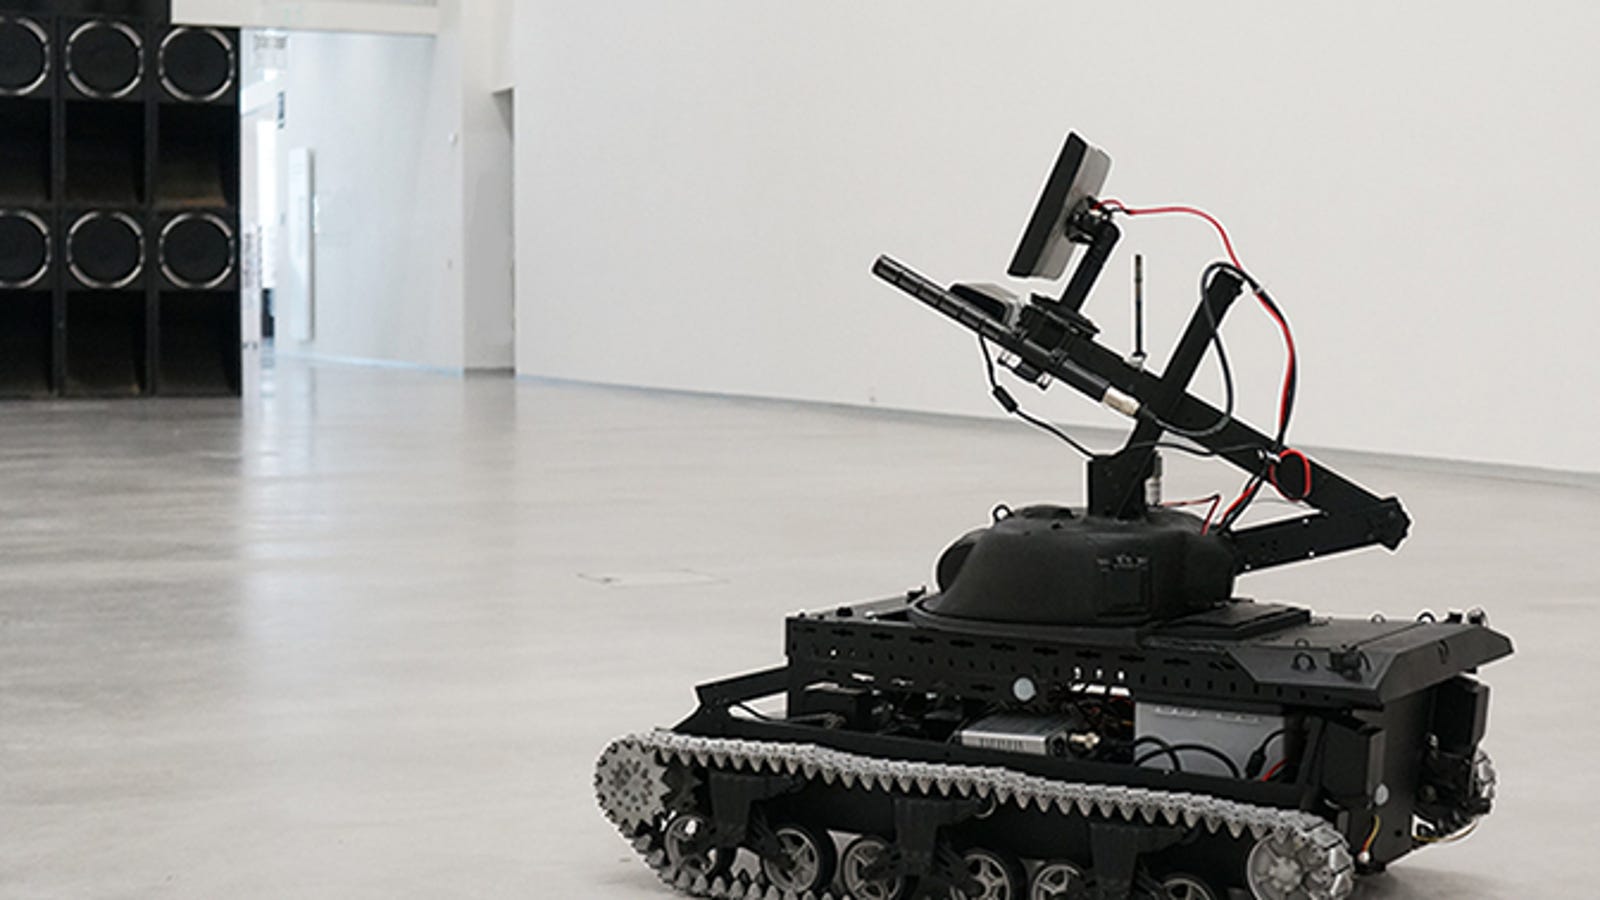 These Eavesdropping Drone Tanks Have Something to Tell You